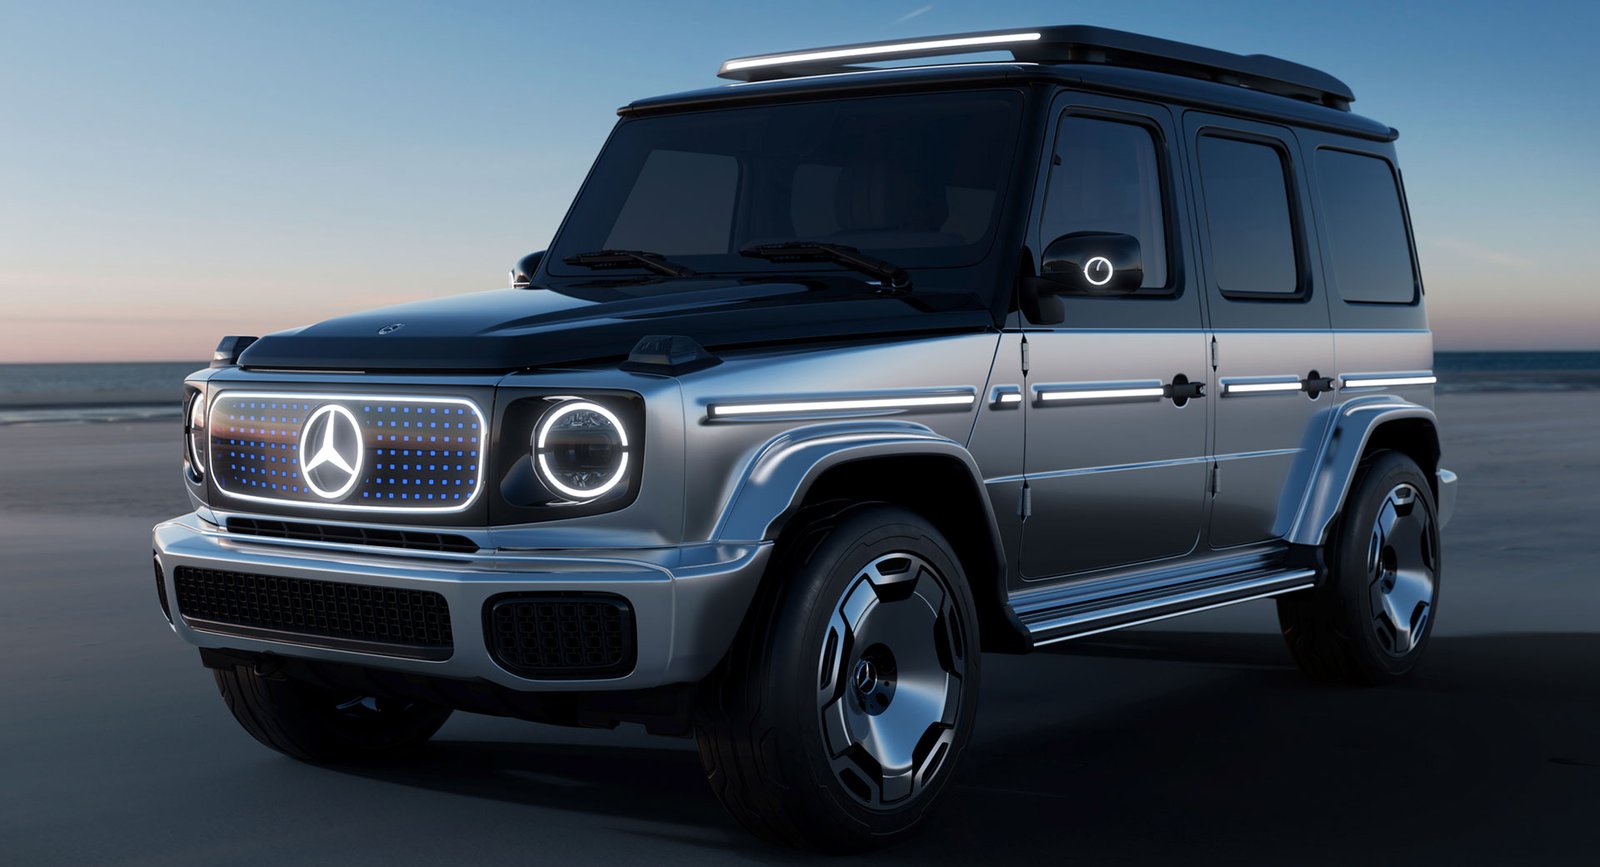 2025 Electric Six With the Mercedes-Benz G-Wagen, the First Six-Cylinder